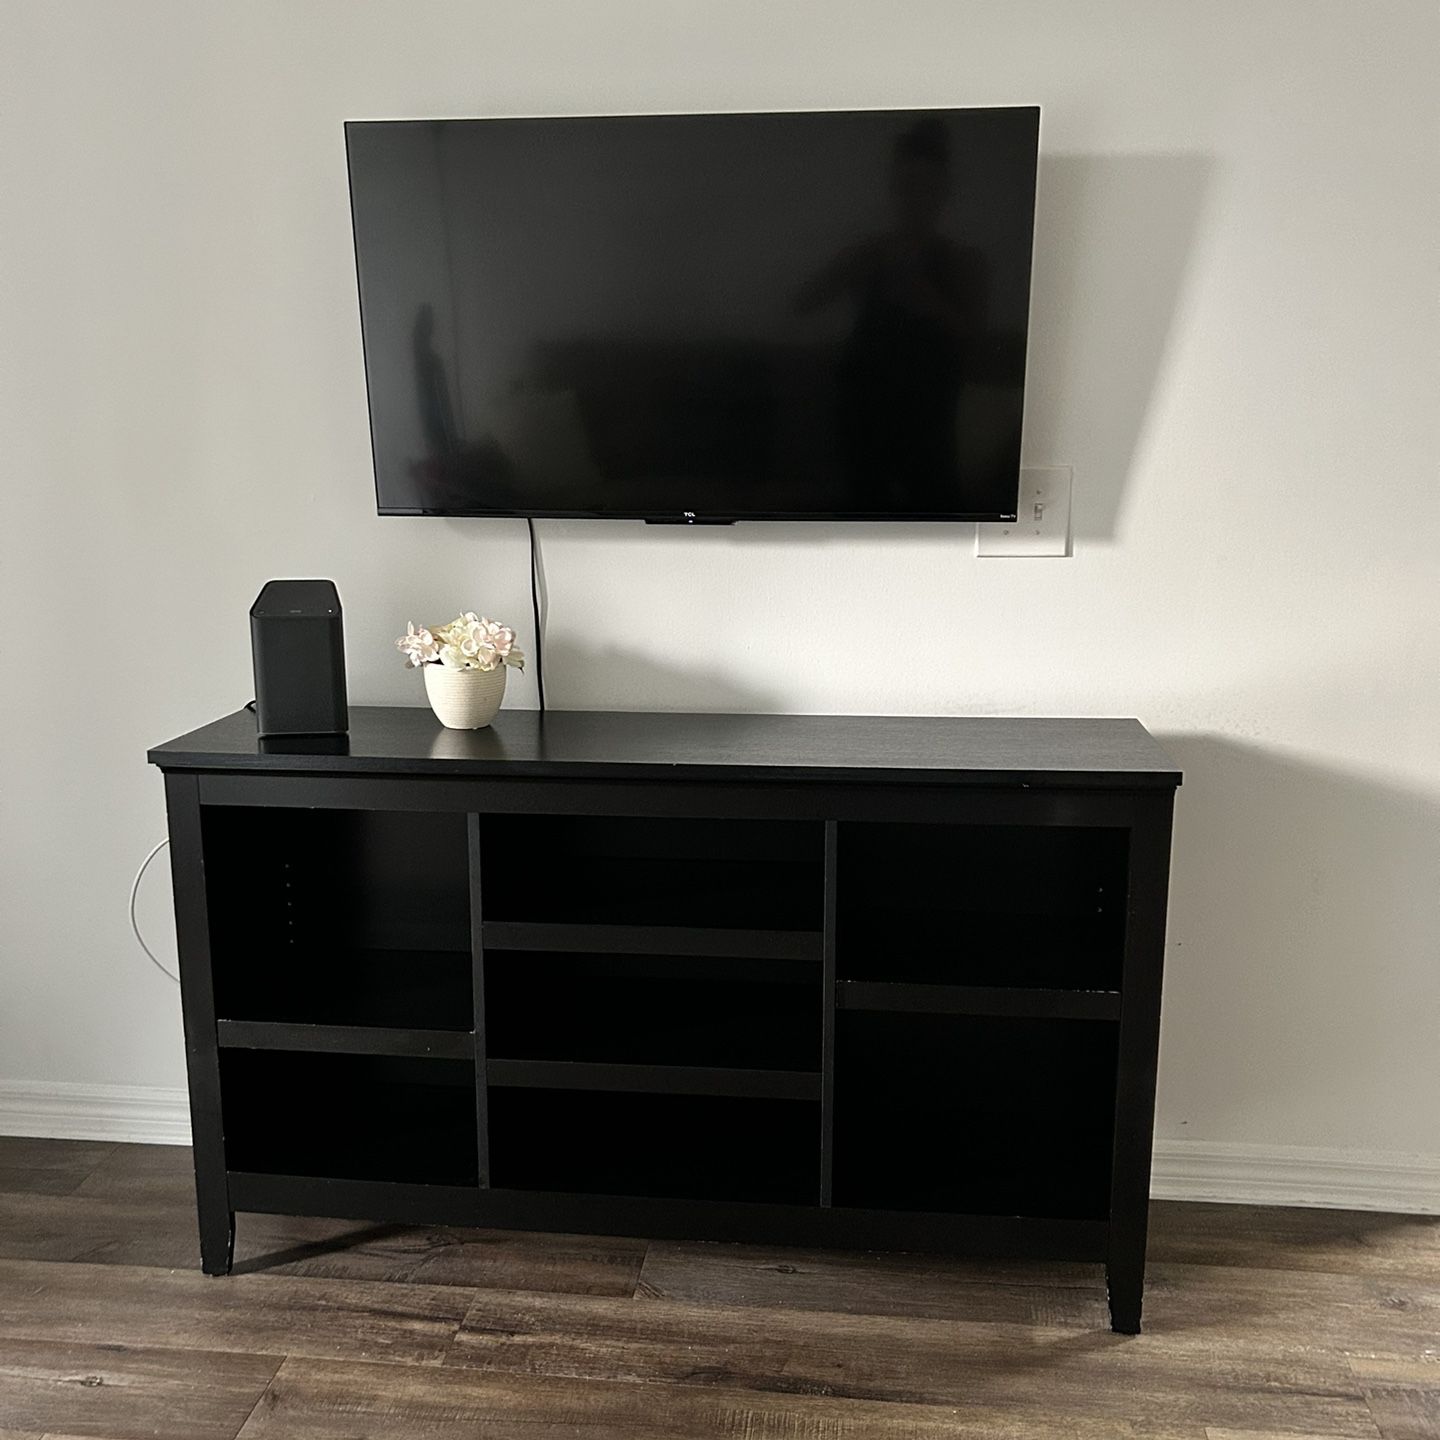 Tv and Black Console Table 